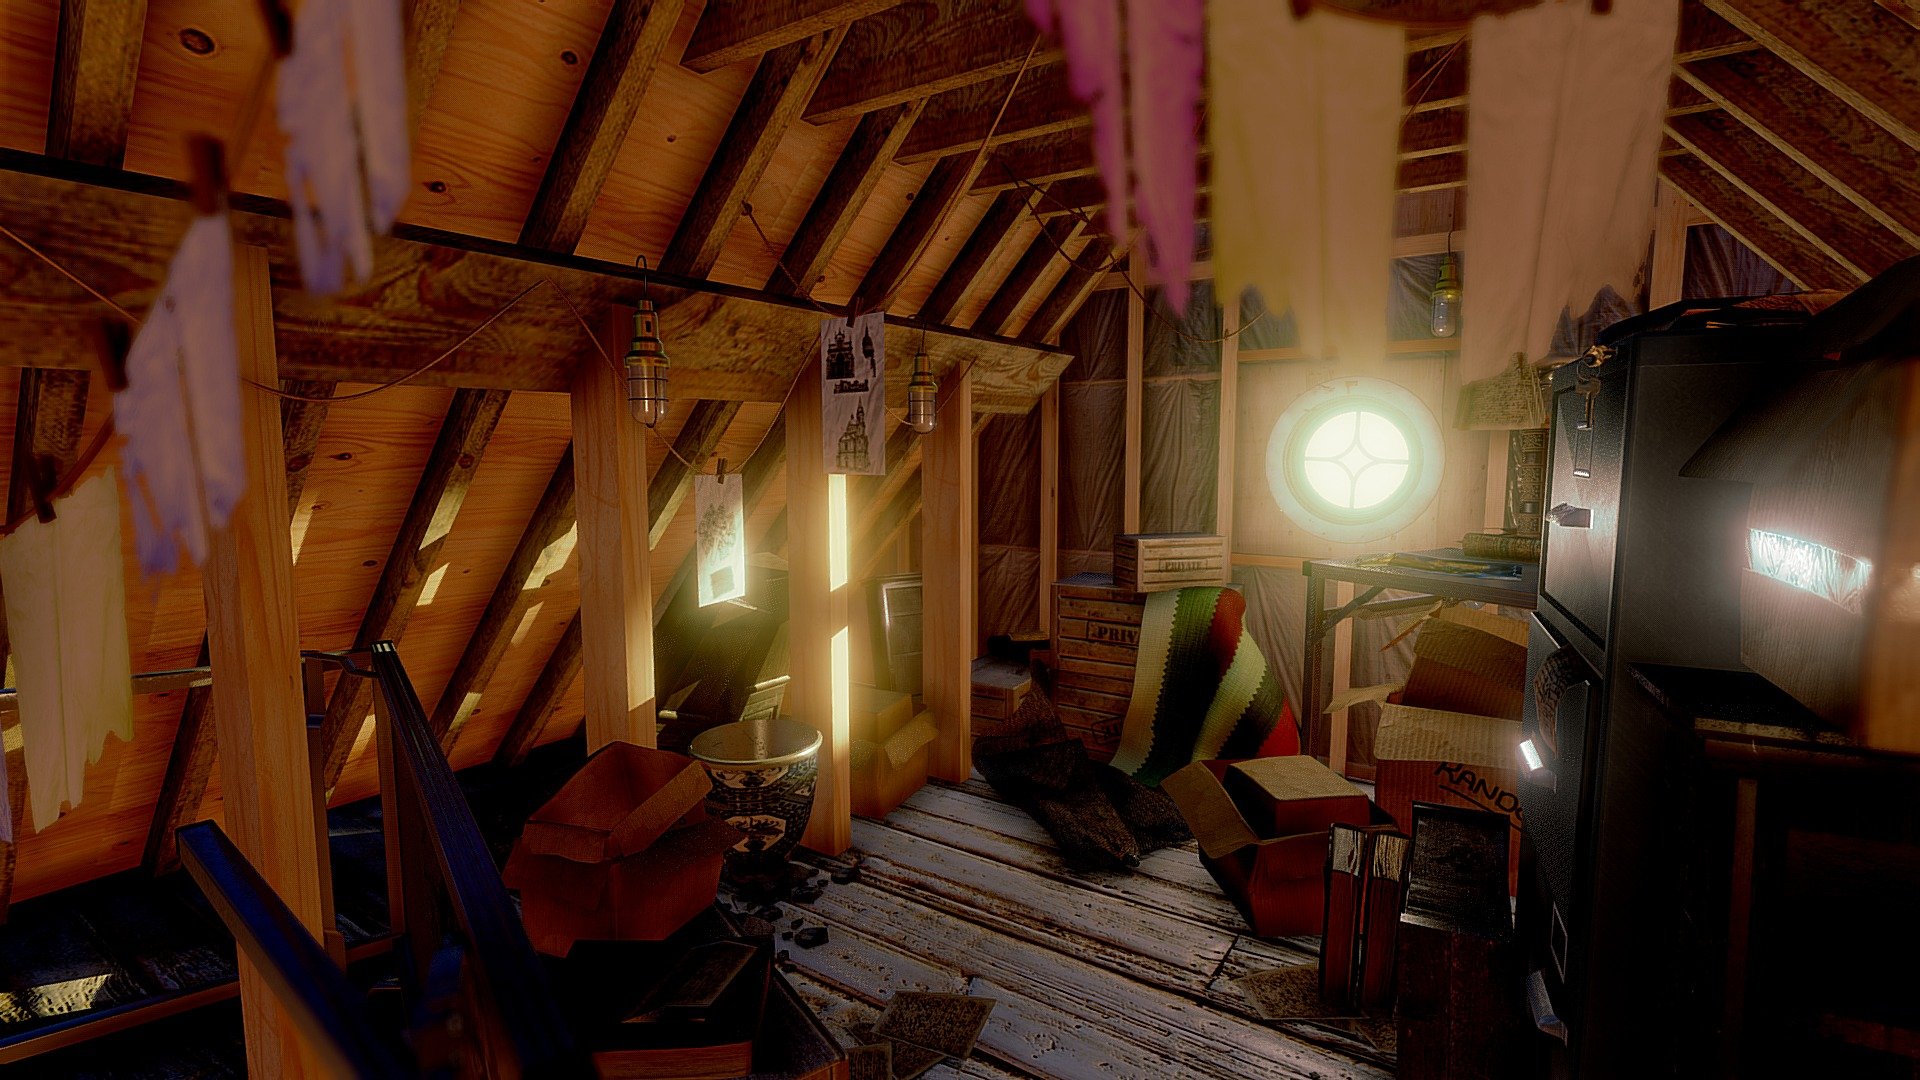 An adventurer's attic. A storage of memories, when will be the last time? Maybe the next time? Maybe never again&hellip;

Created in Blender3D textured in Photoshop, heavily inspired by an environment seen in the famed Uncharted 4 environment of Nathan Drake's attic. Interesting composition based on atmosphere and lighting to create a sense of nostalgia 3d model